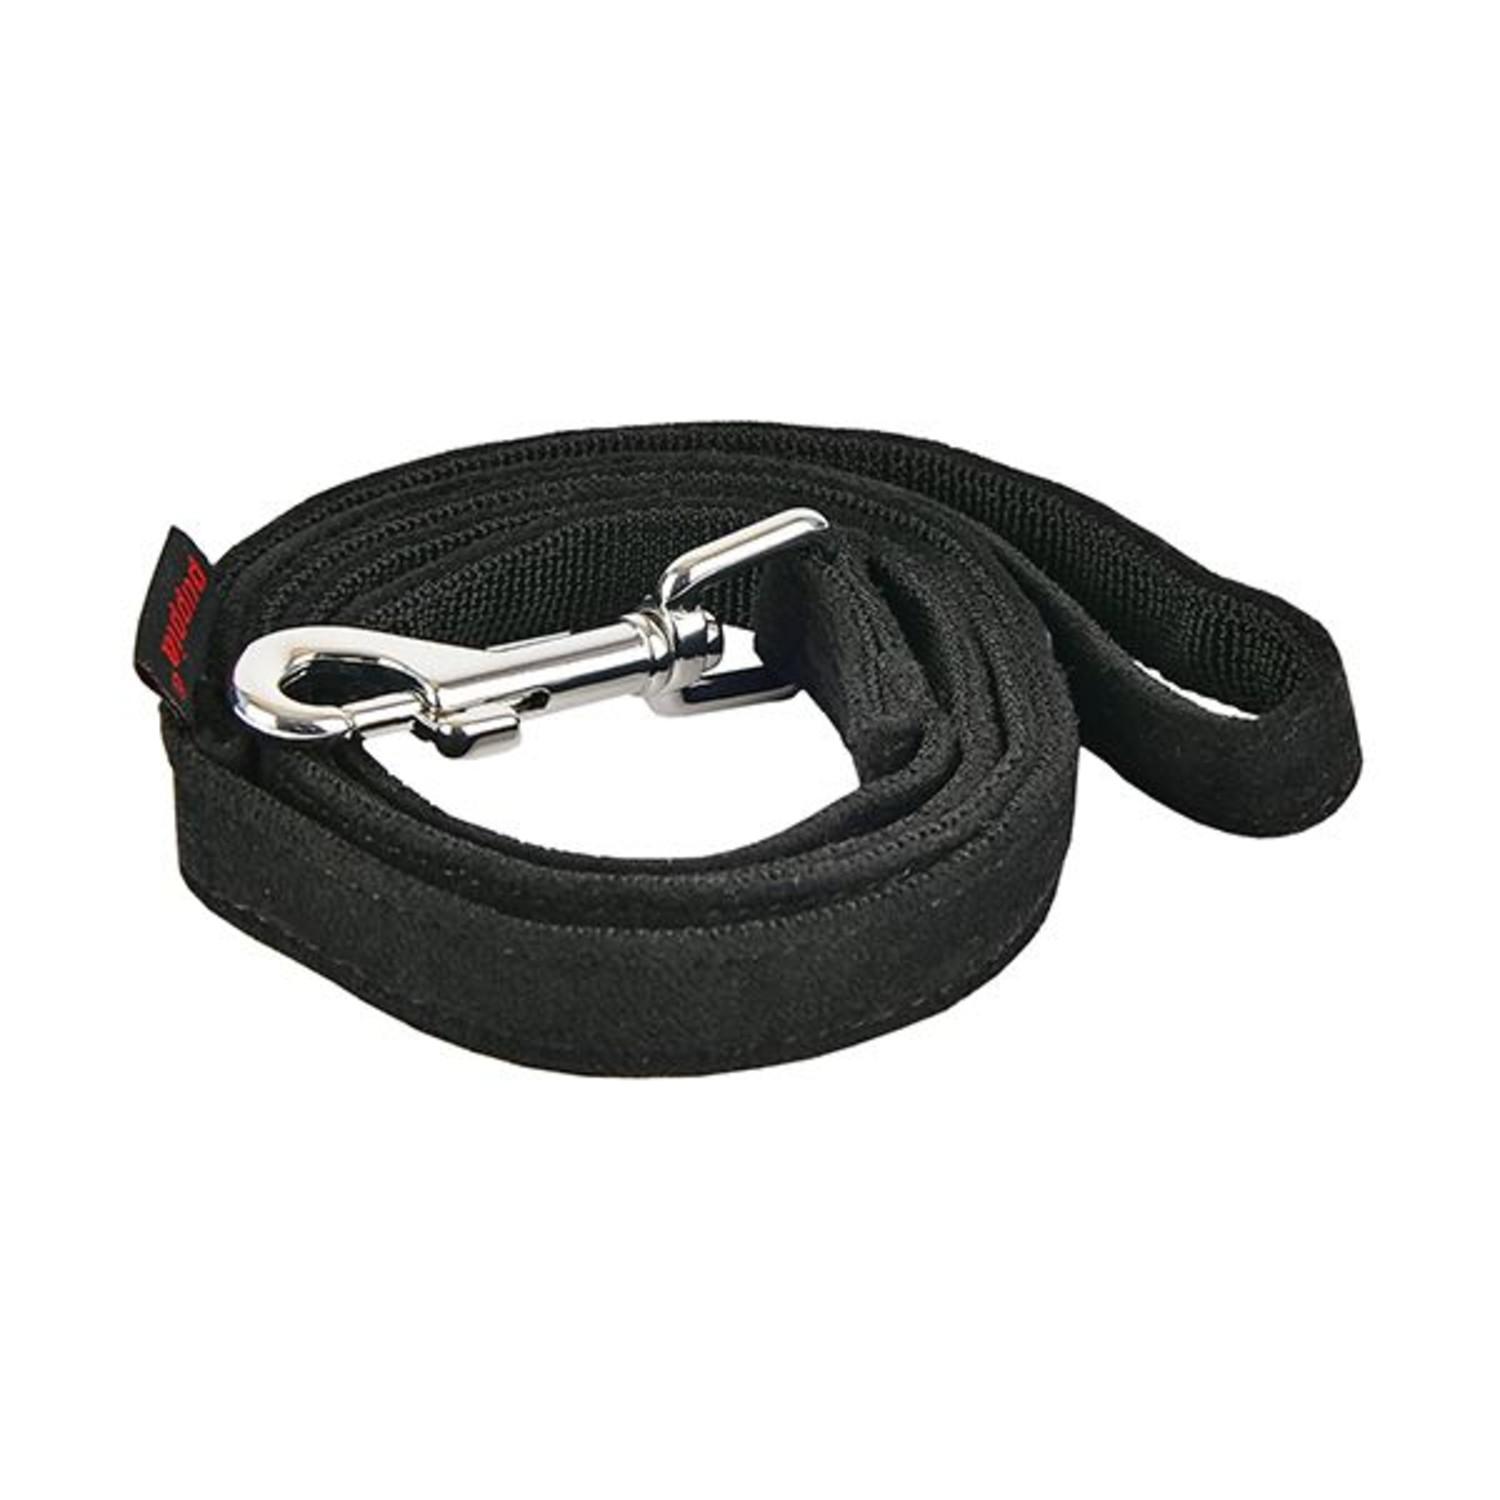 Terry Dog Leash by Puppia - Black